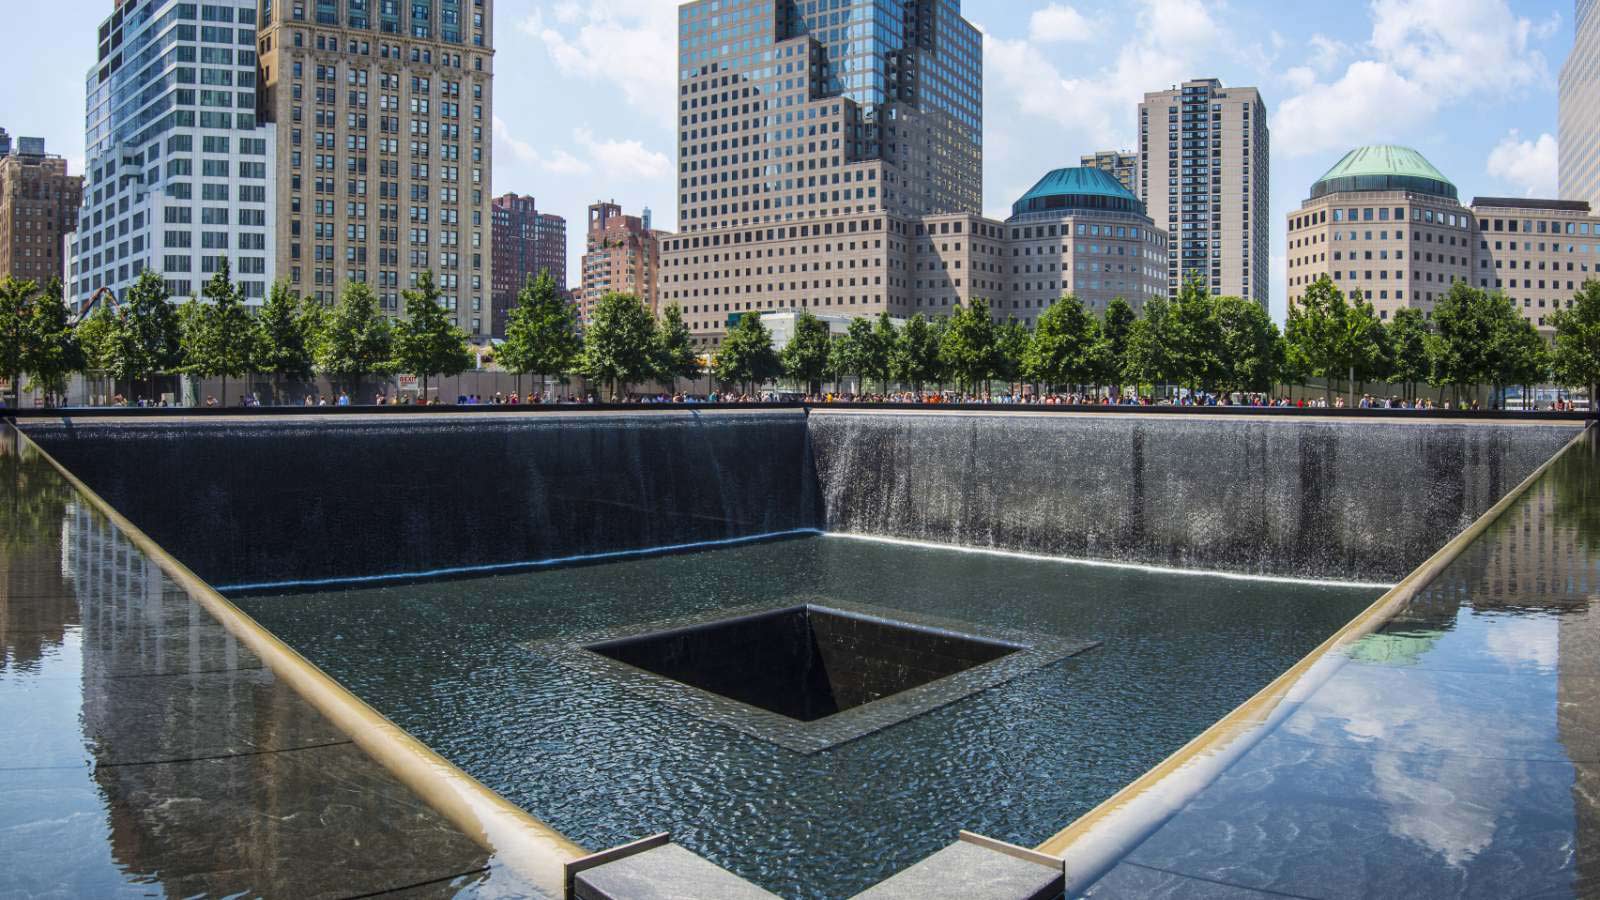 <p>The National September 11 Memorial and Museum is a tribute to the victims of the 9/11 terrorist attacks. It’s a powerful and emotional experience to visit the site and learn about the tragic events of that day.</p>